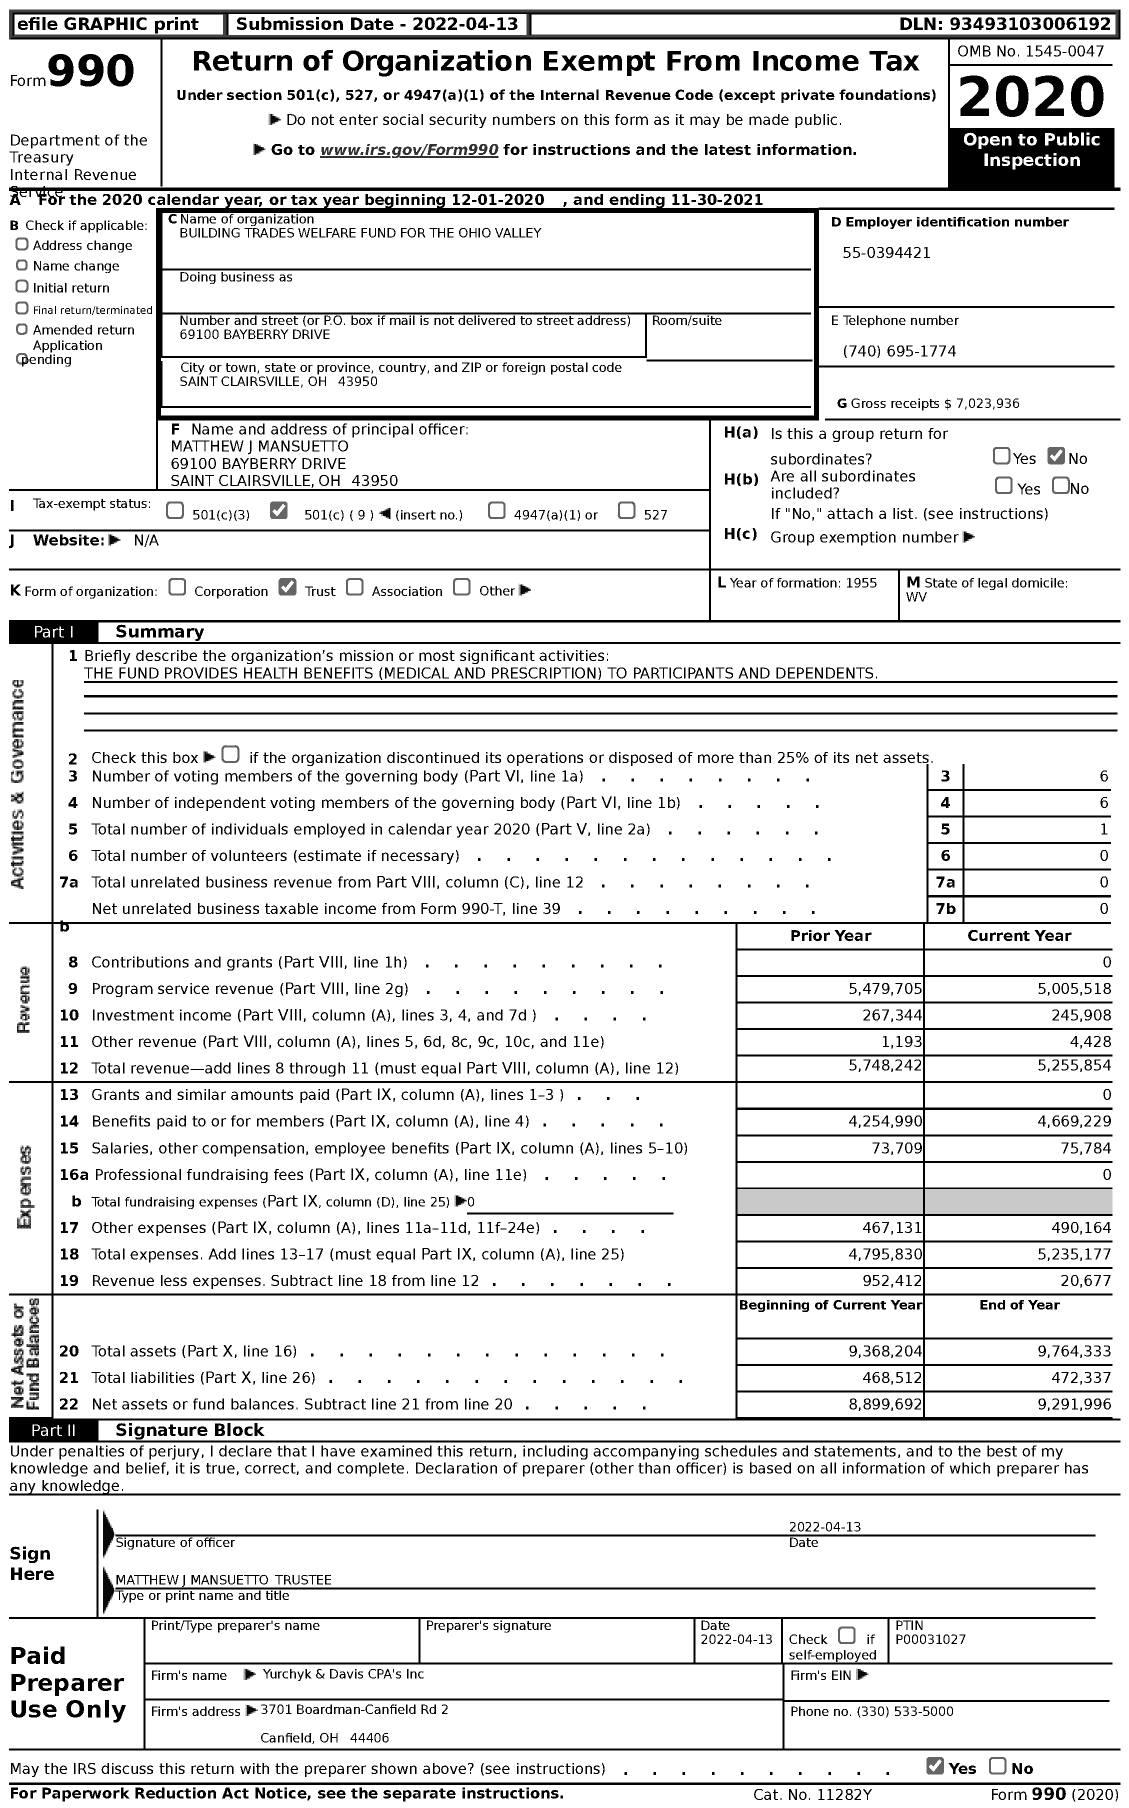 Image of first page of 2020 Form 990 for Building Trades Welfare Fund for the Ohio Valley